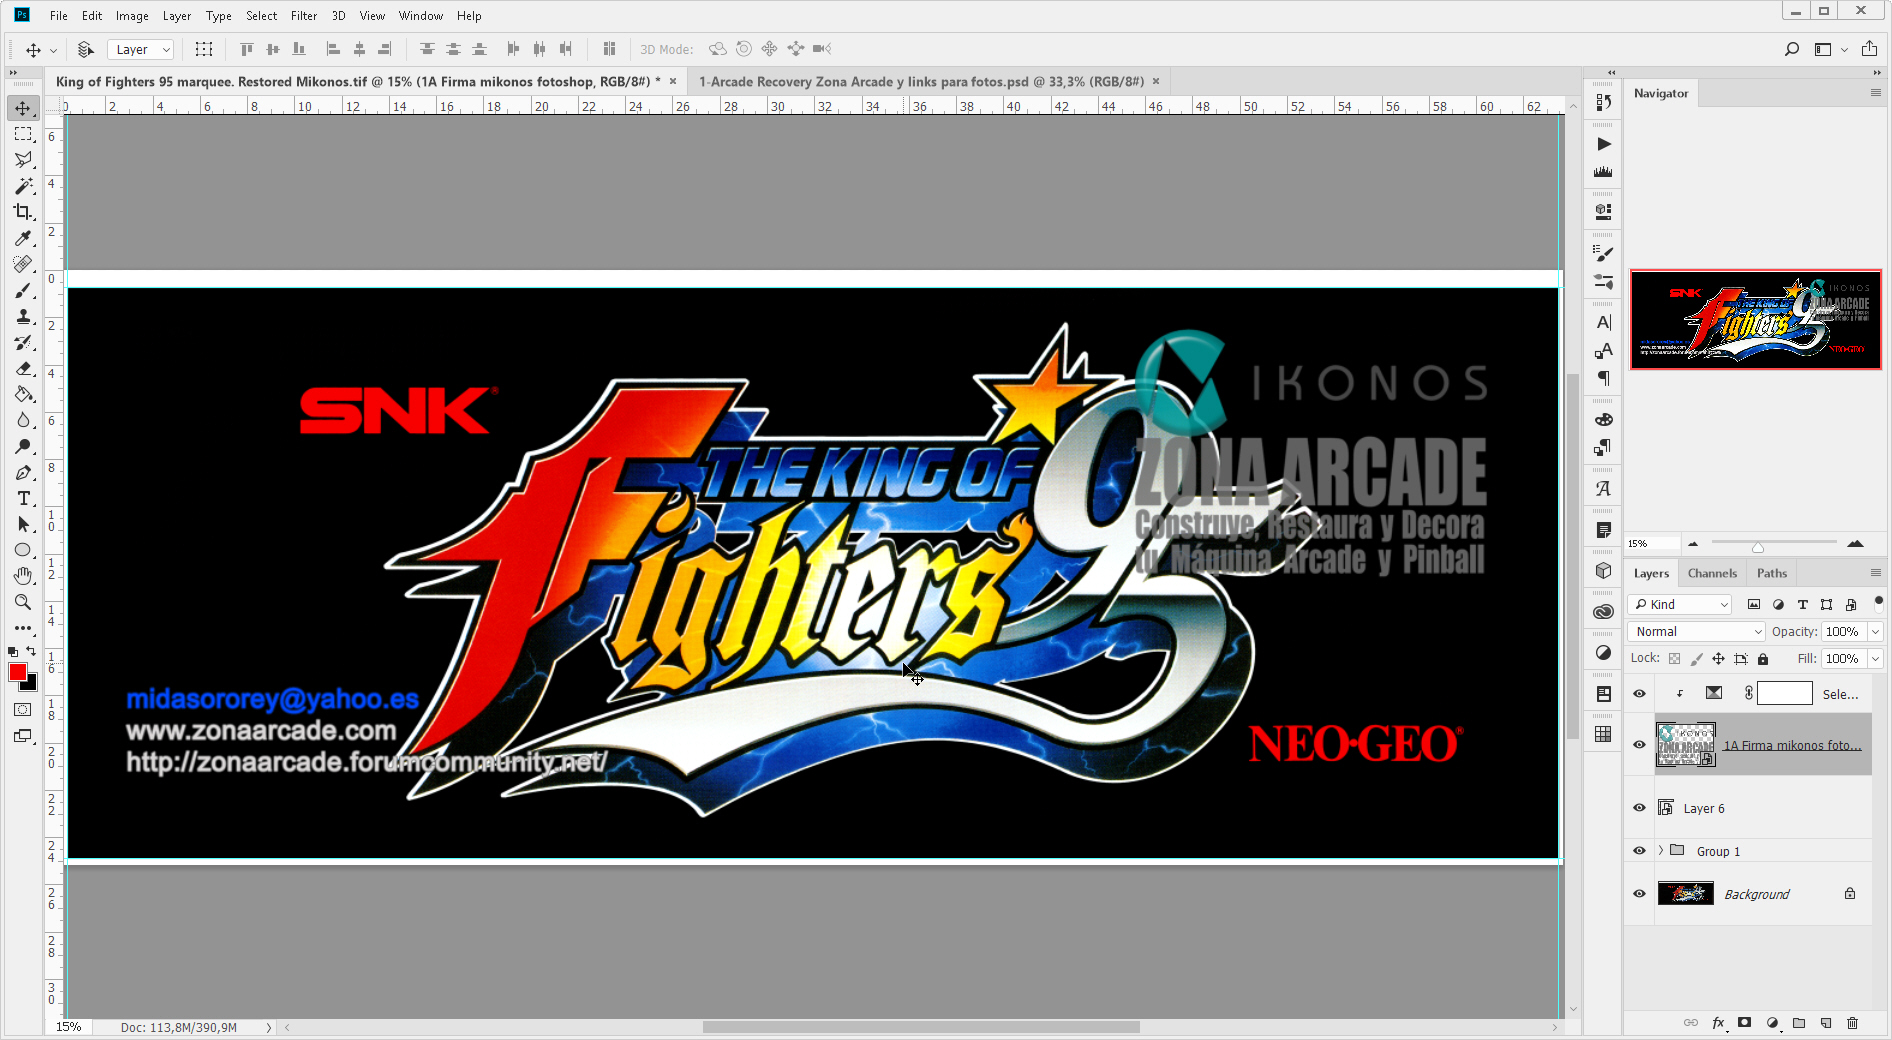 King-of-Fighters-95-marquee-Restored-Mikonos1